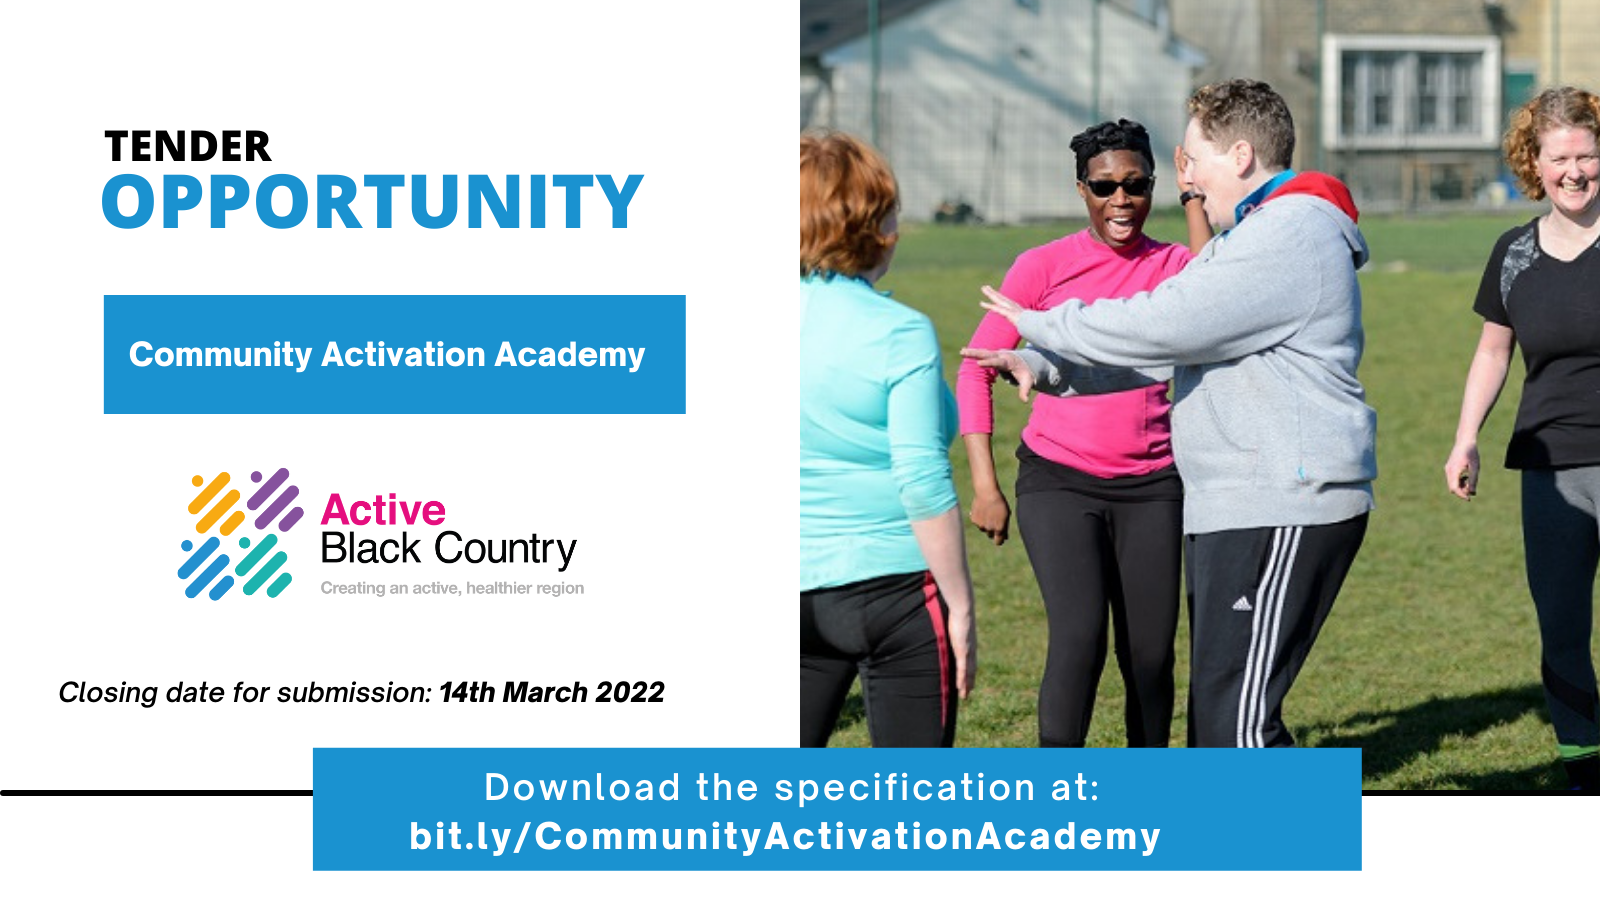 Community Activation Academy Tender Opportunity